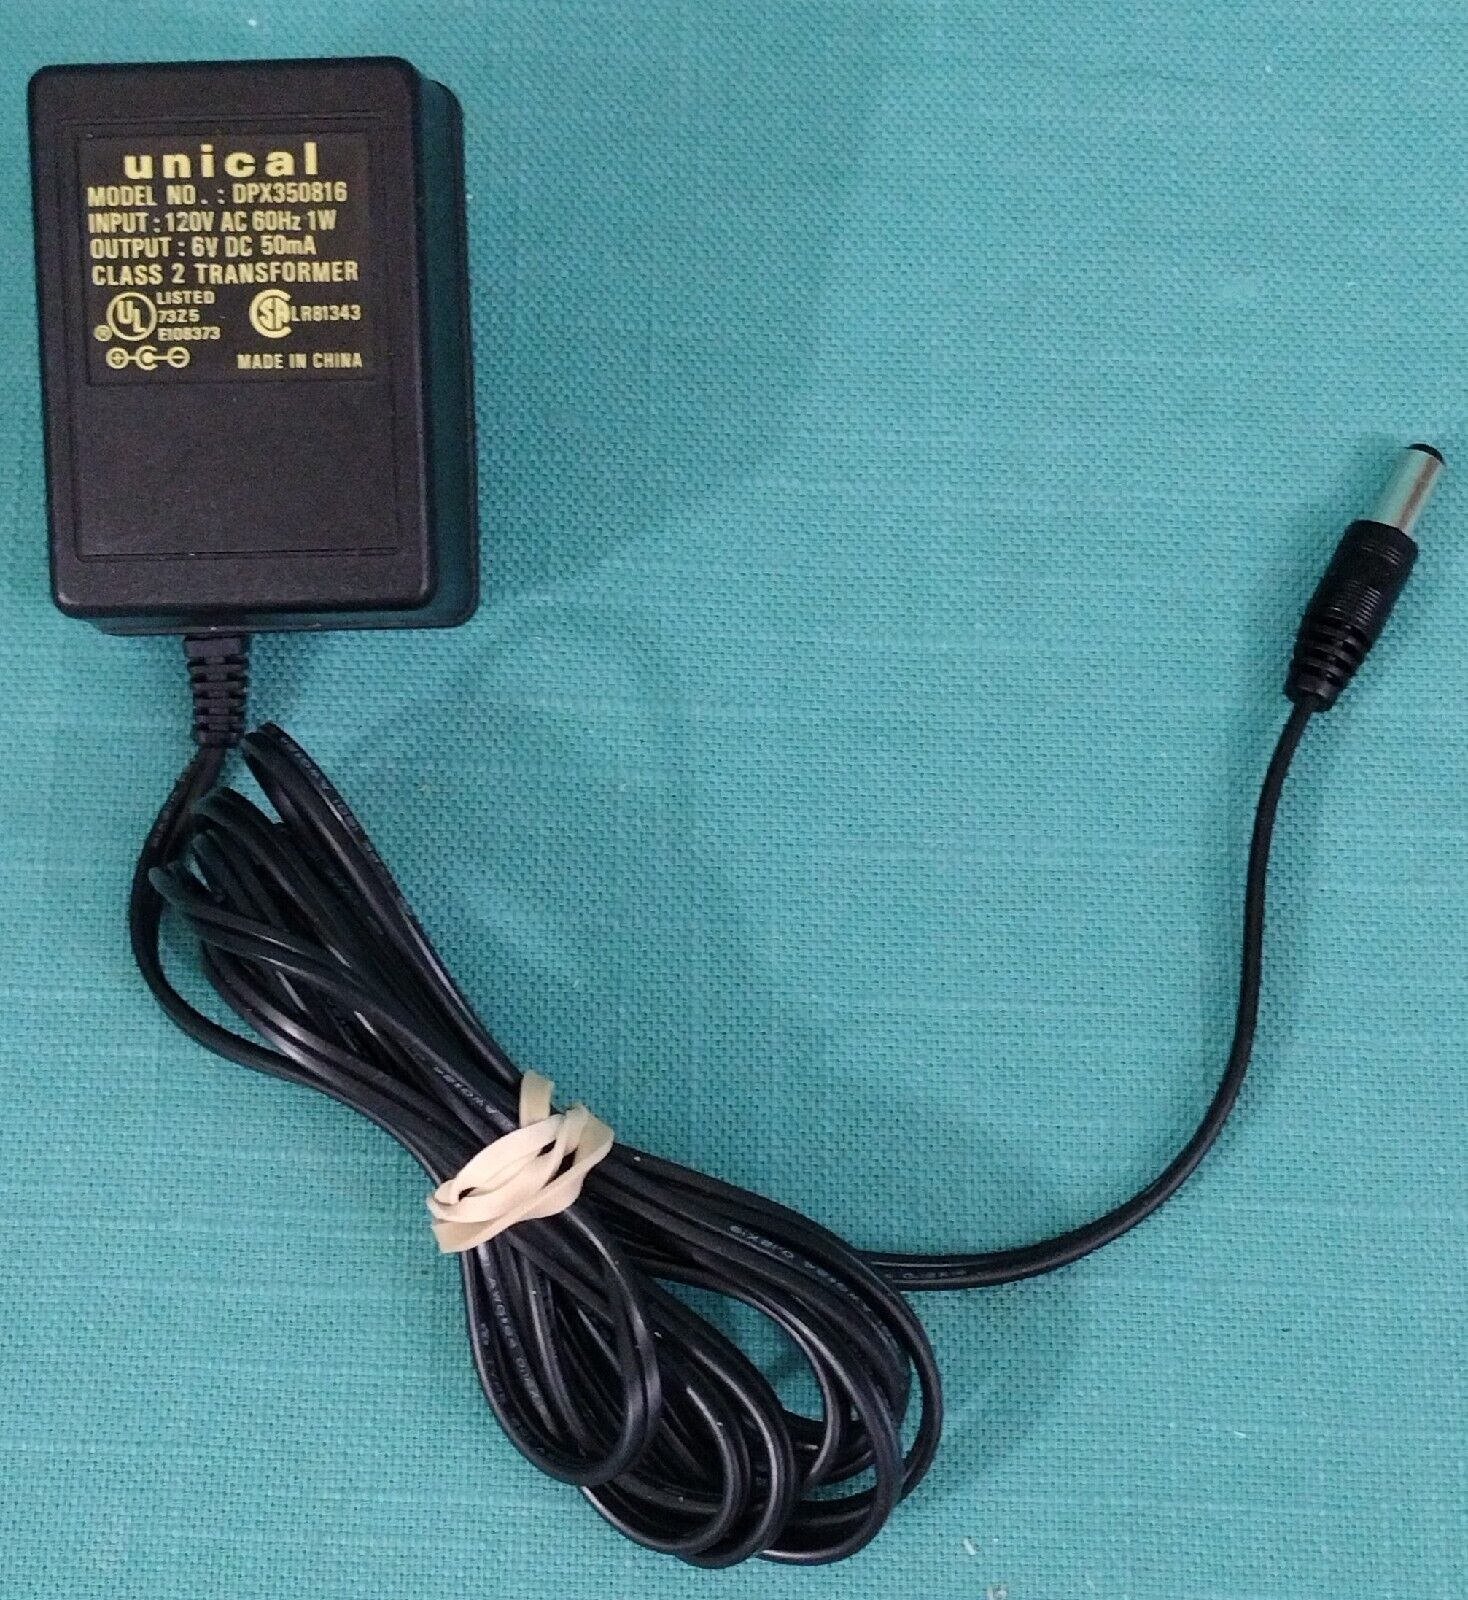 *Brand NEW*UNICAL Input 120V Output 6VDC 50mA DC AC/DC Adapter Model No: DPX350816 Tested Working PO